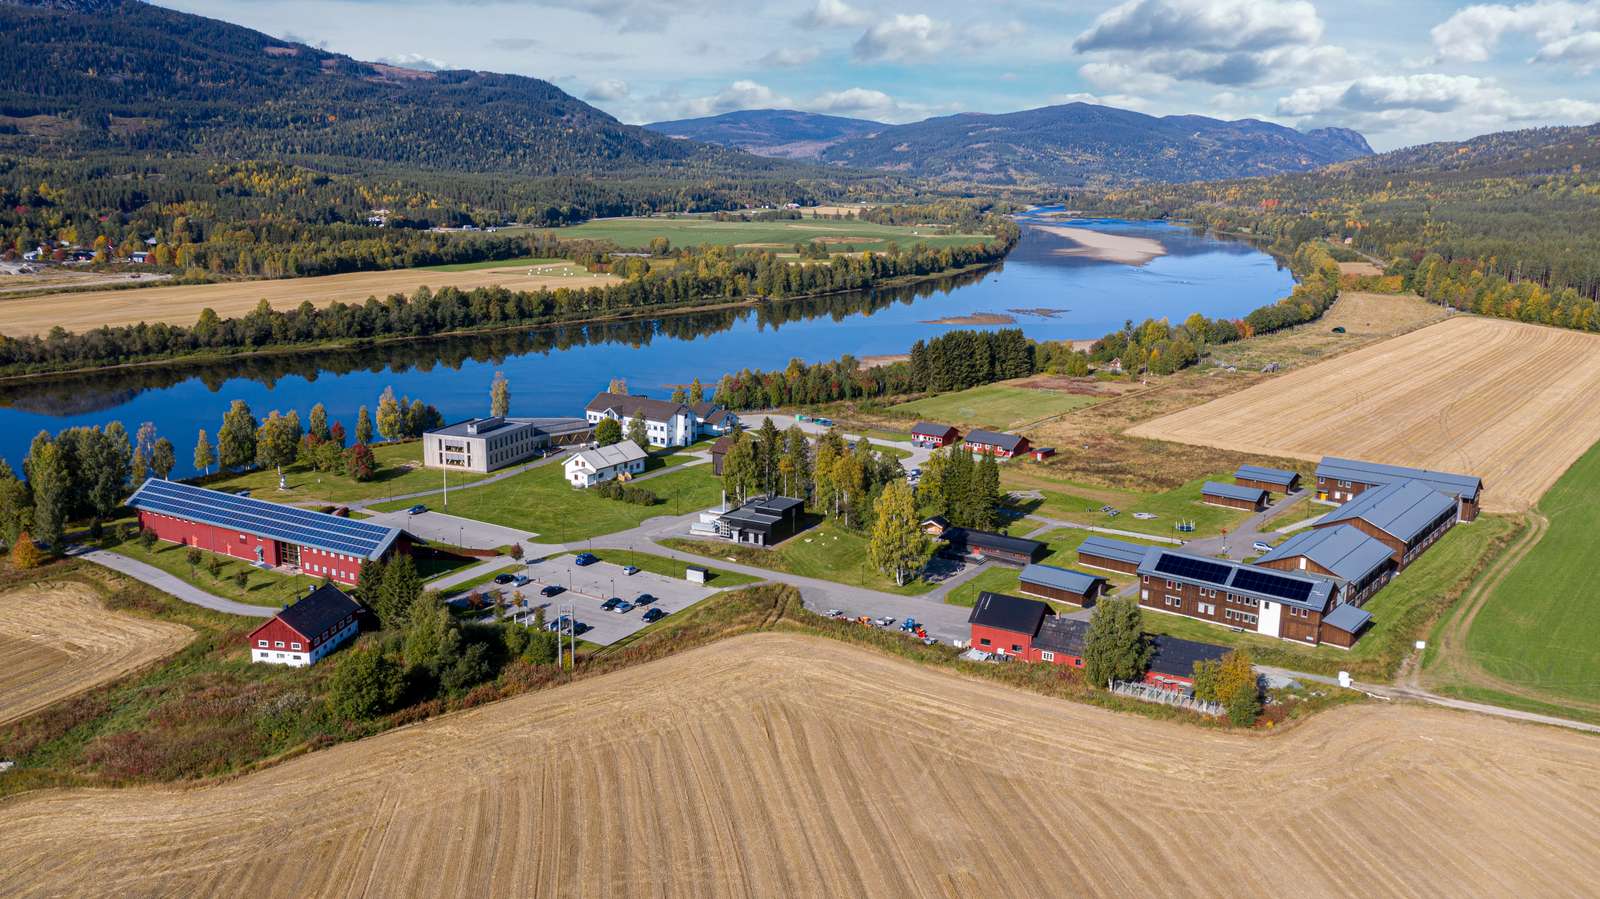  Photograph of the campus at Evenstad (Photo: INN University)